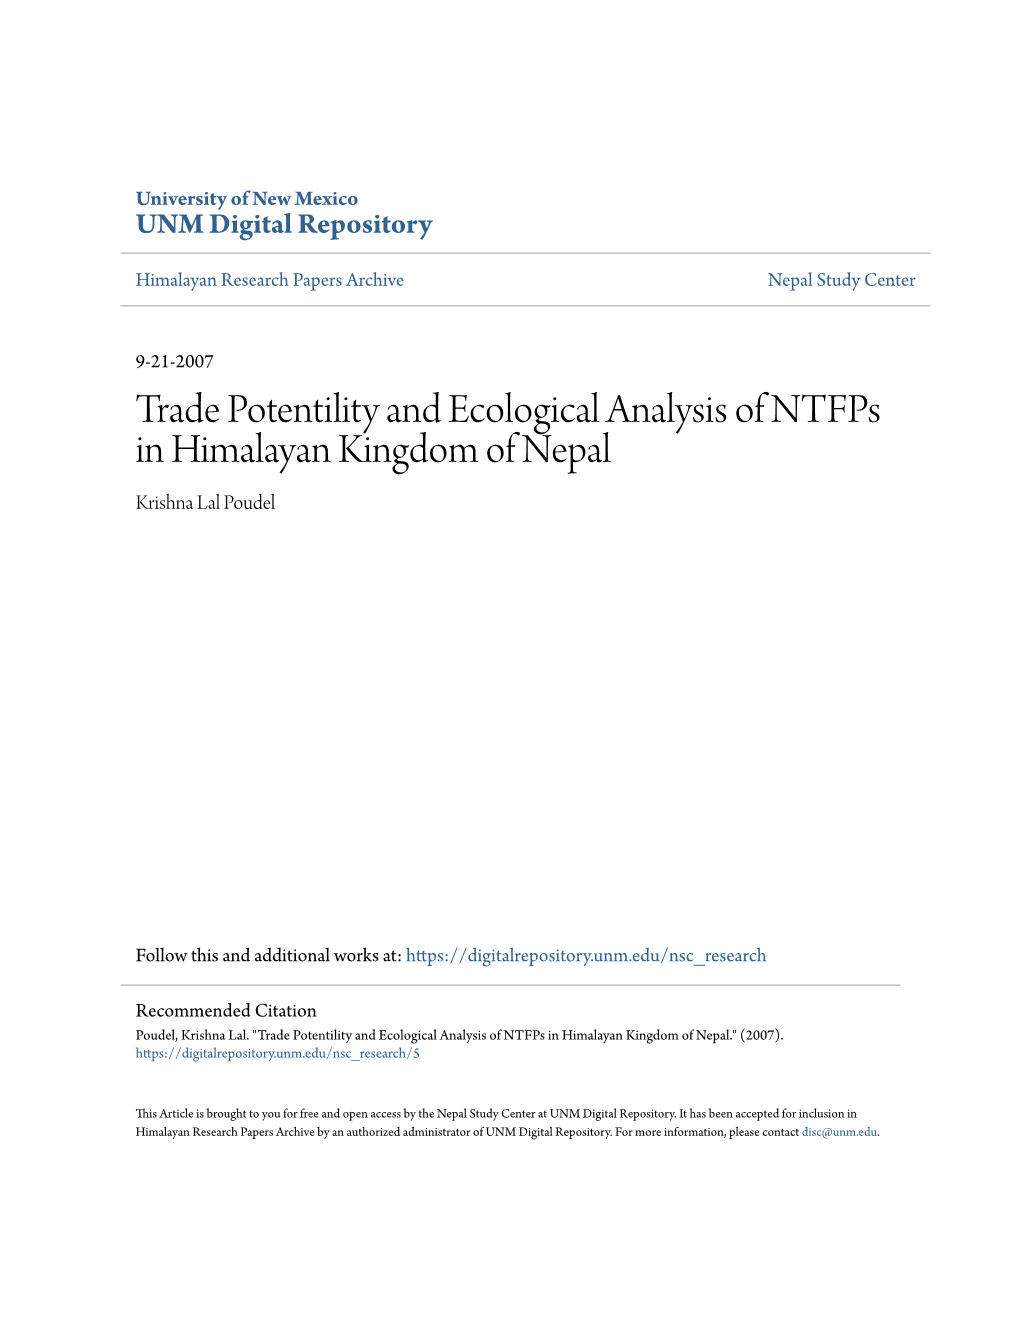 Trade Potentility and Ecological Analysis of Ntfps in Himalayan Kingdom of Nepal Krishna Lal Poudel